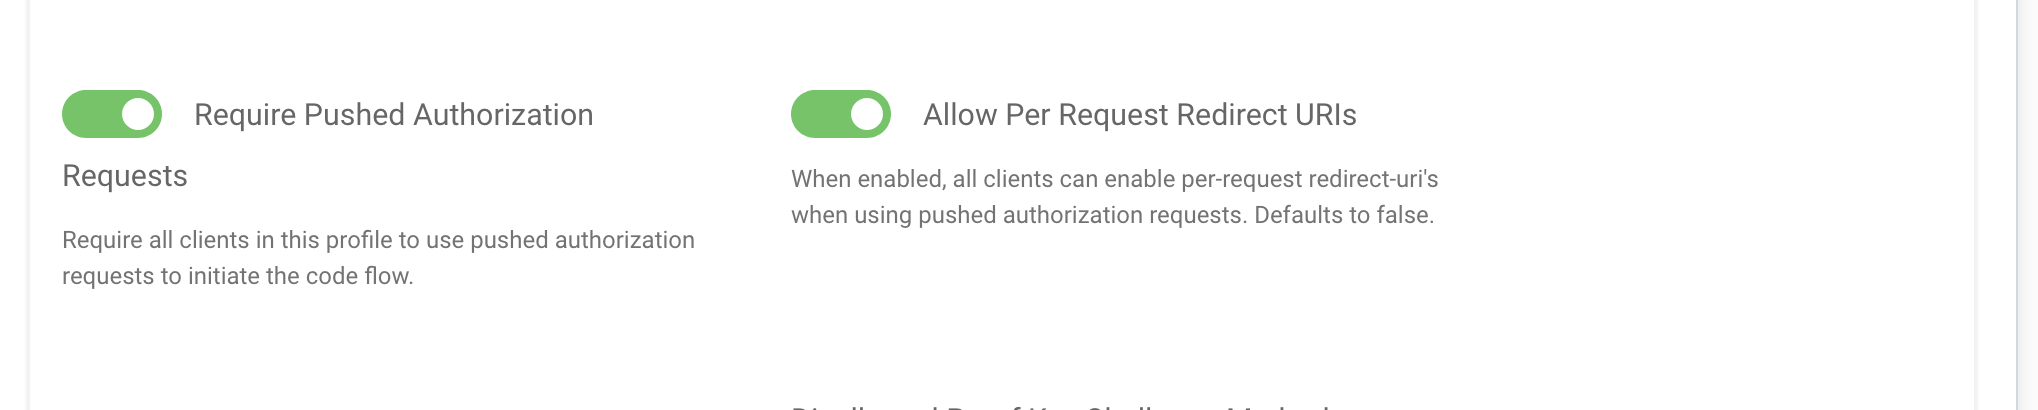 Enabled per-request redirect URIs